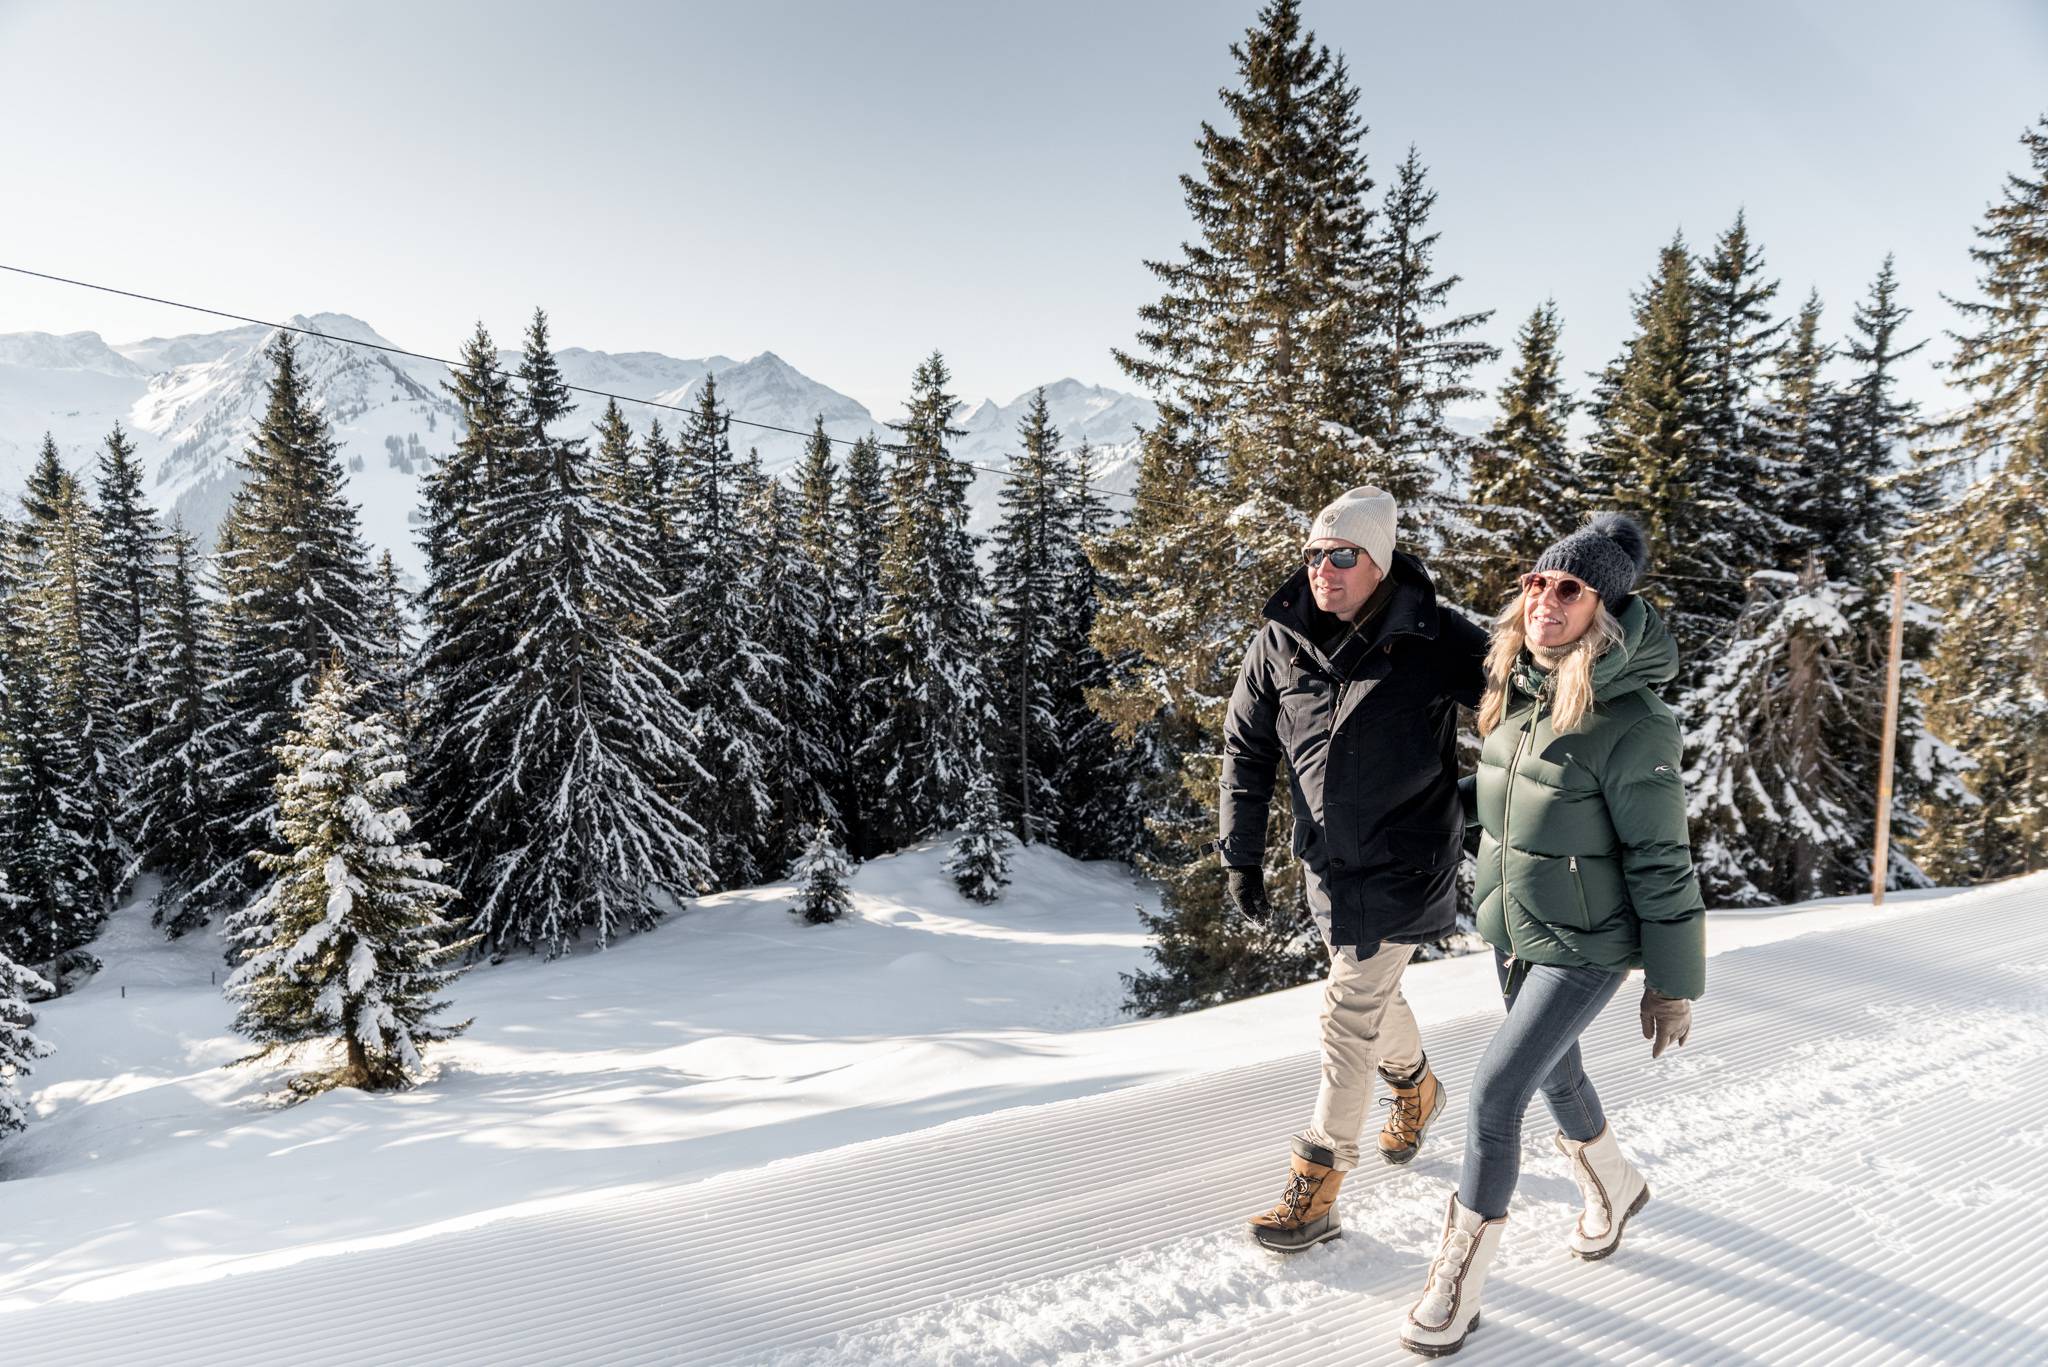 Together in the snow: Guided tours & winter hiking weeks - Hotel Gstaaderhof